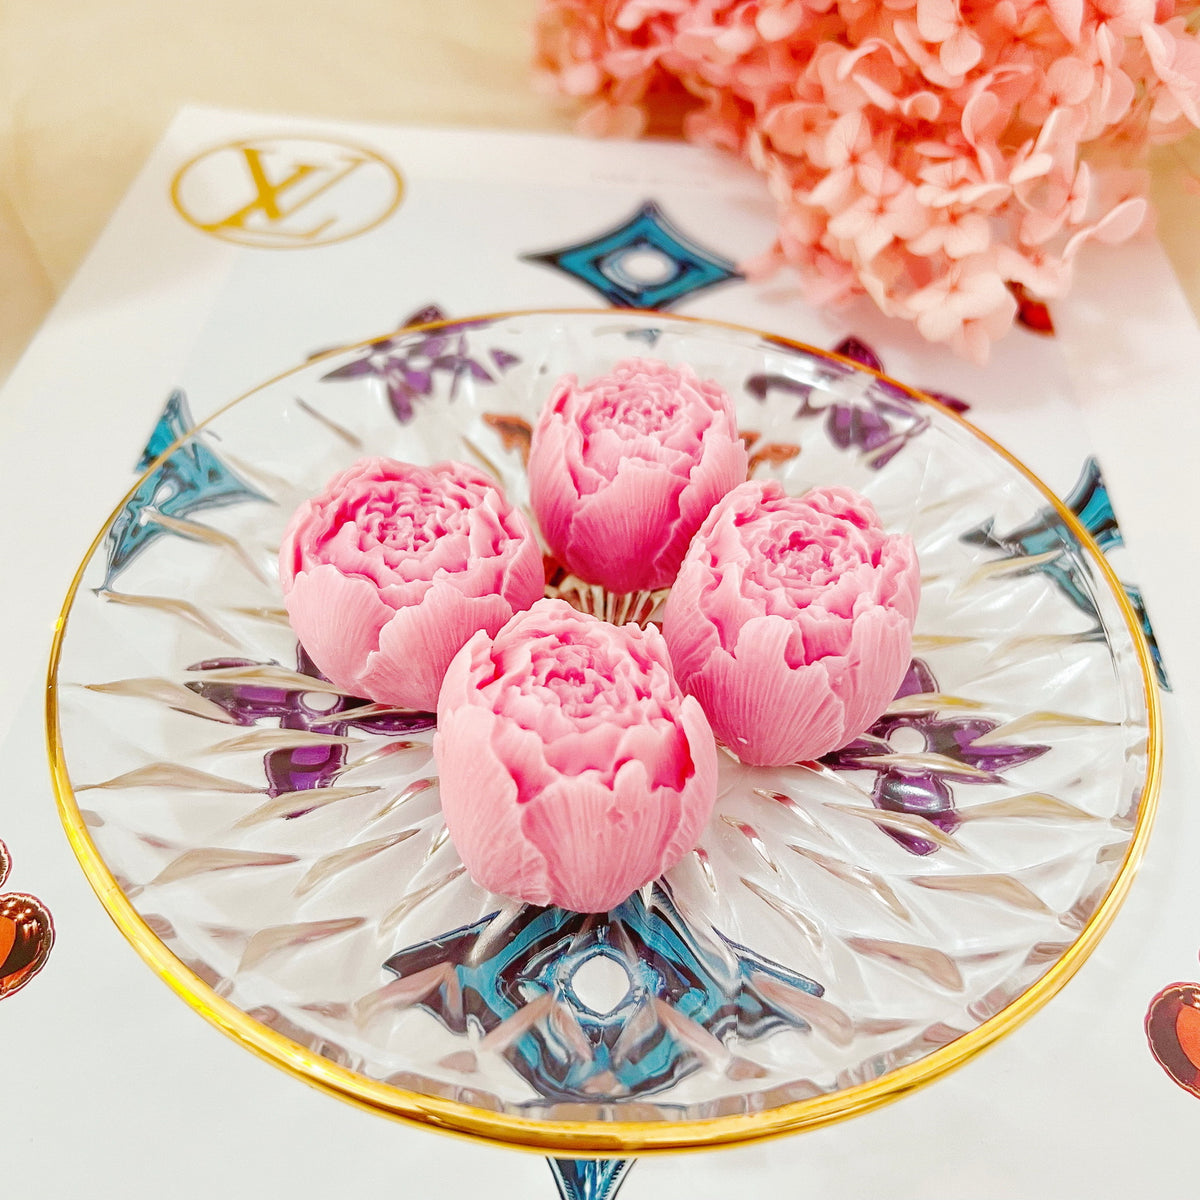 Four handcrafted rosebud soy wax melts by LMJ Candles displayed on a delicate ceramic dish and glazed tray, accentuating their romantic floral scent and eco-friendly qualities.